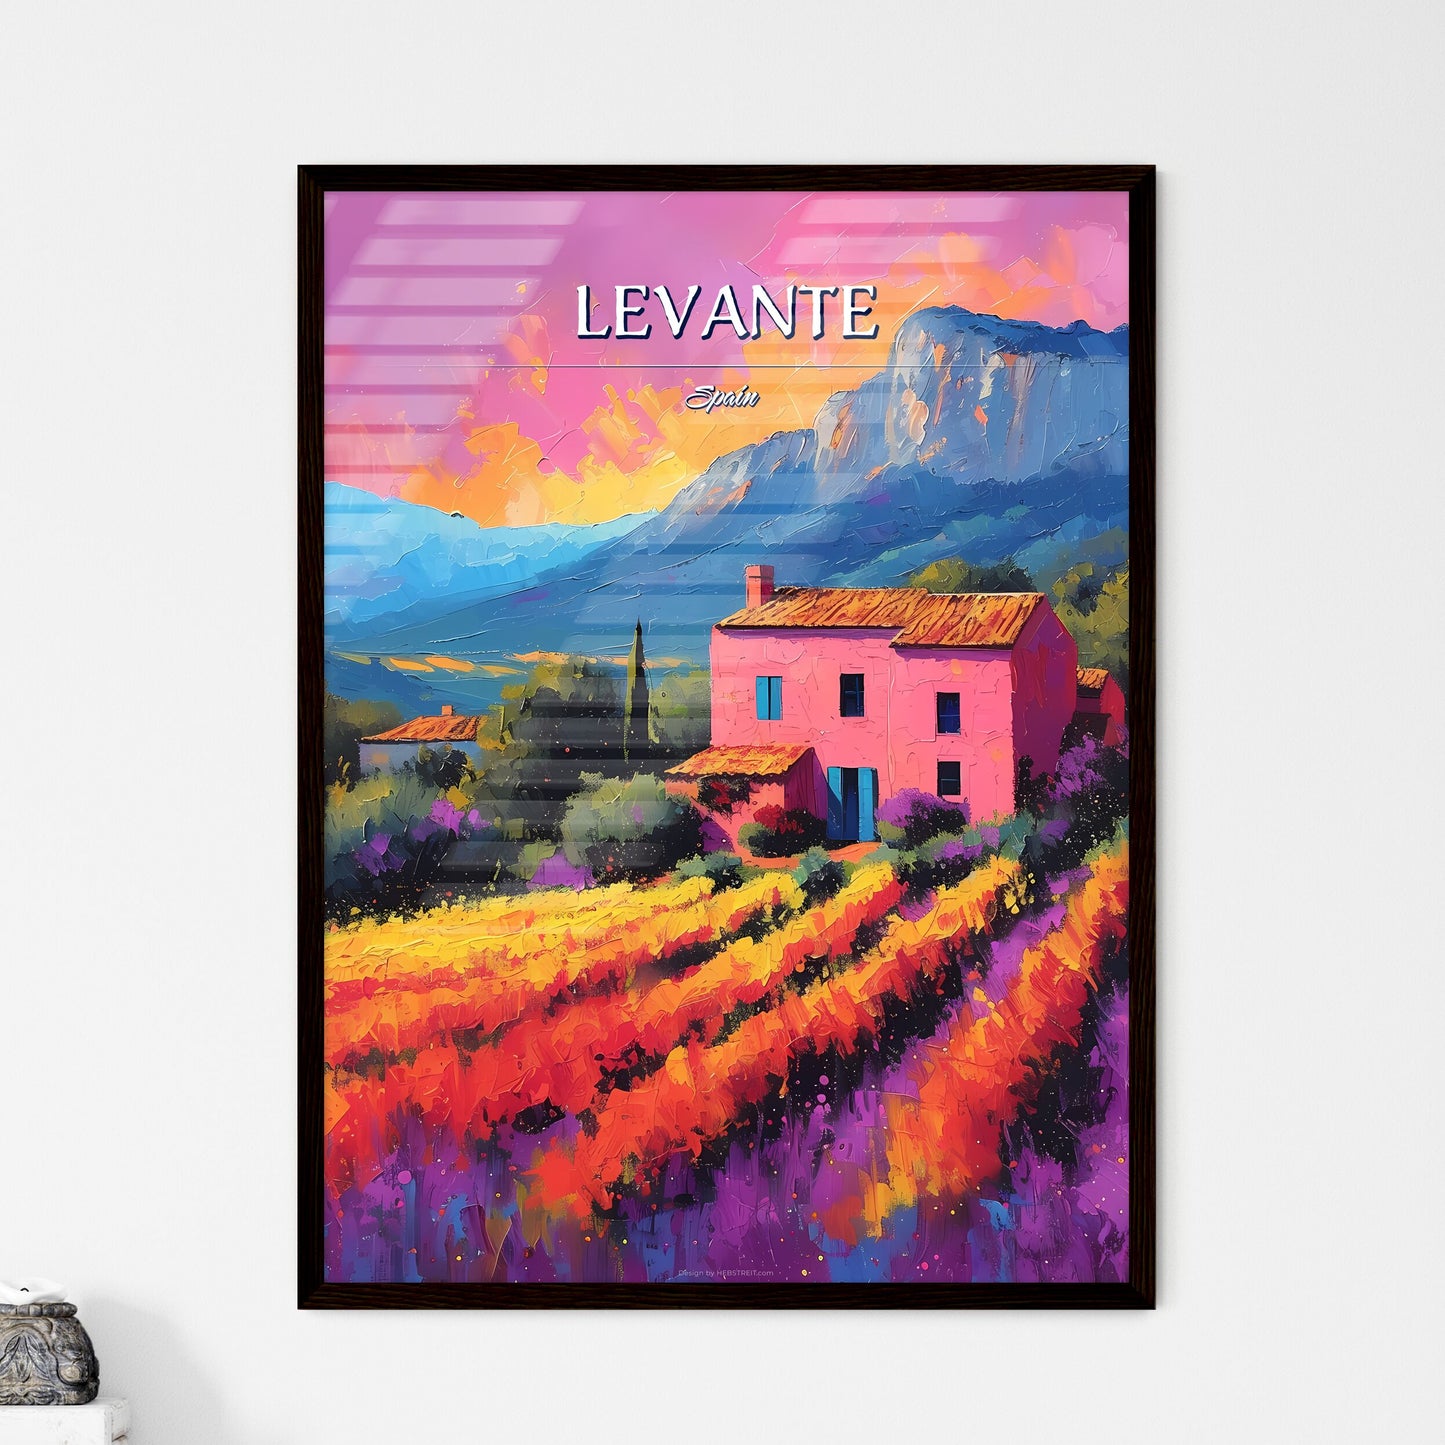 Levante, Spain - Art print of a painting of a house in a field of flowers Default Title